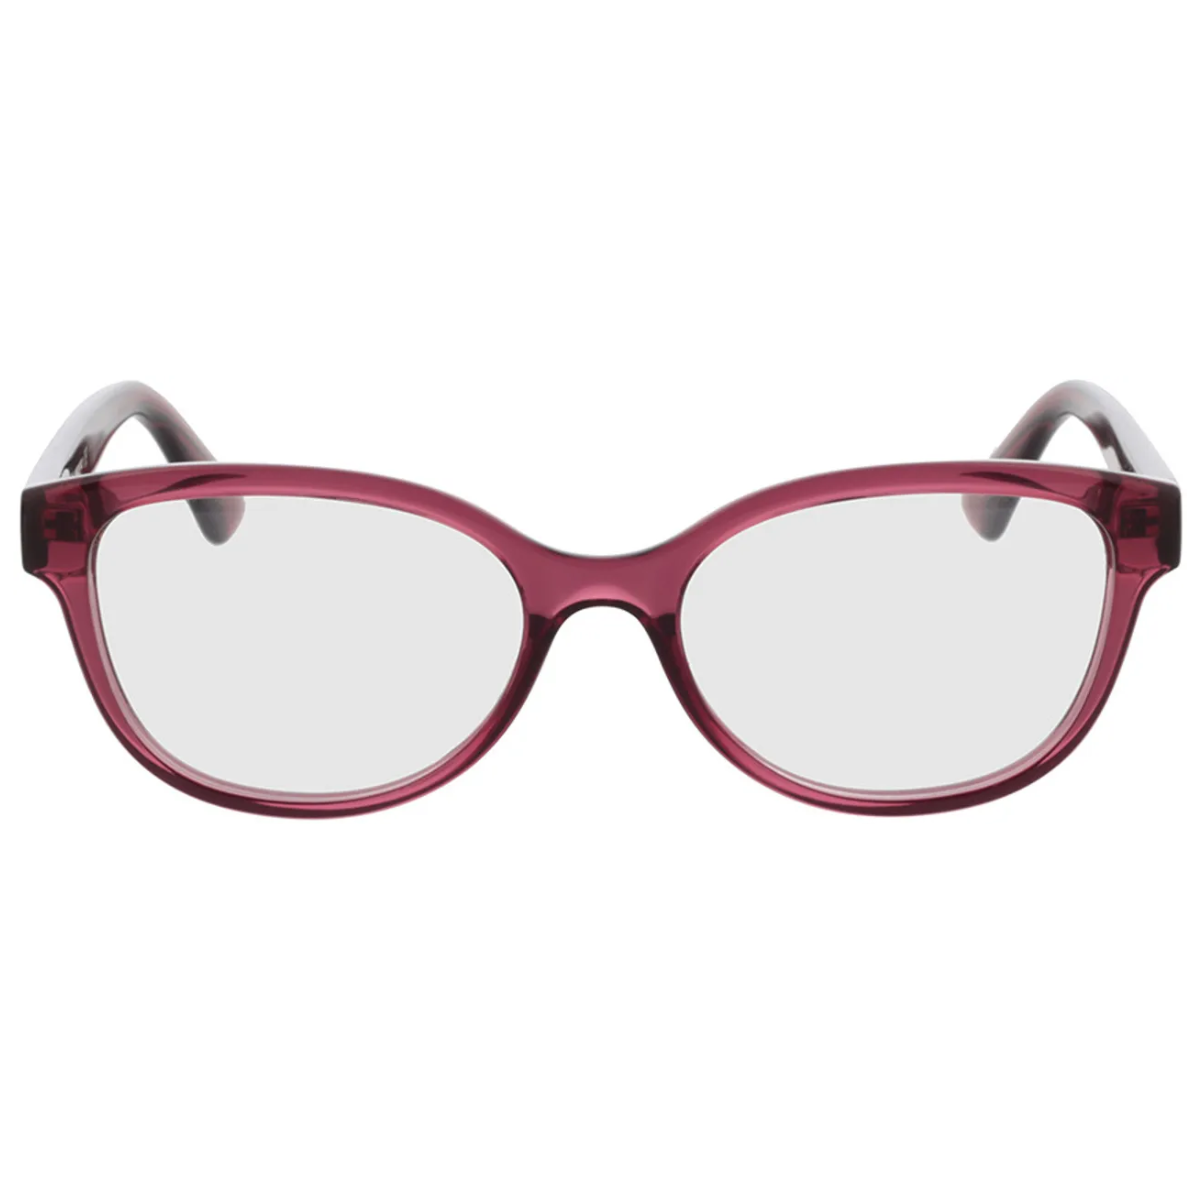 Find Your Perfect Pair: Gucci 1115O Glasses Frames"